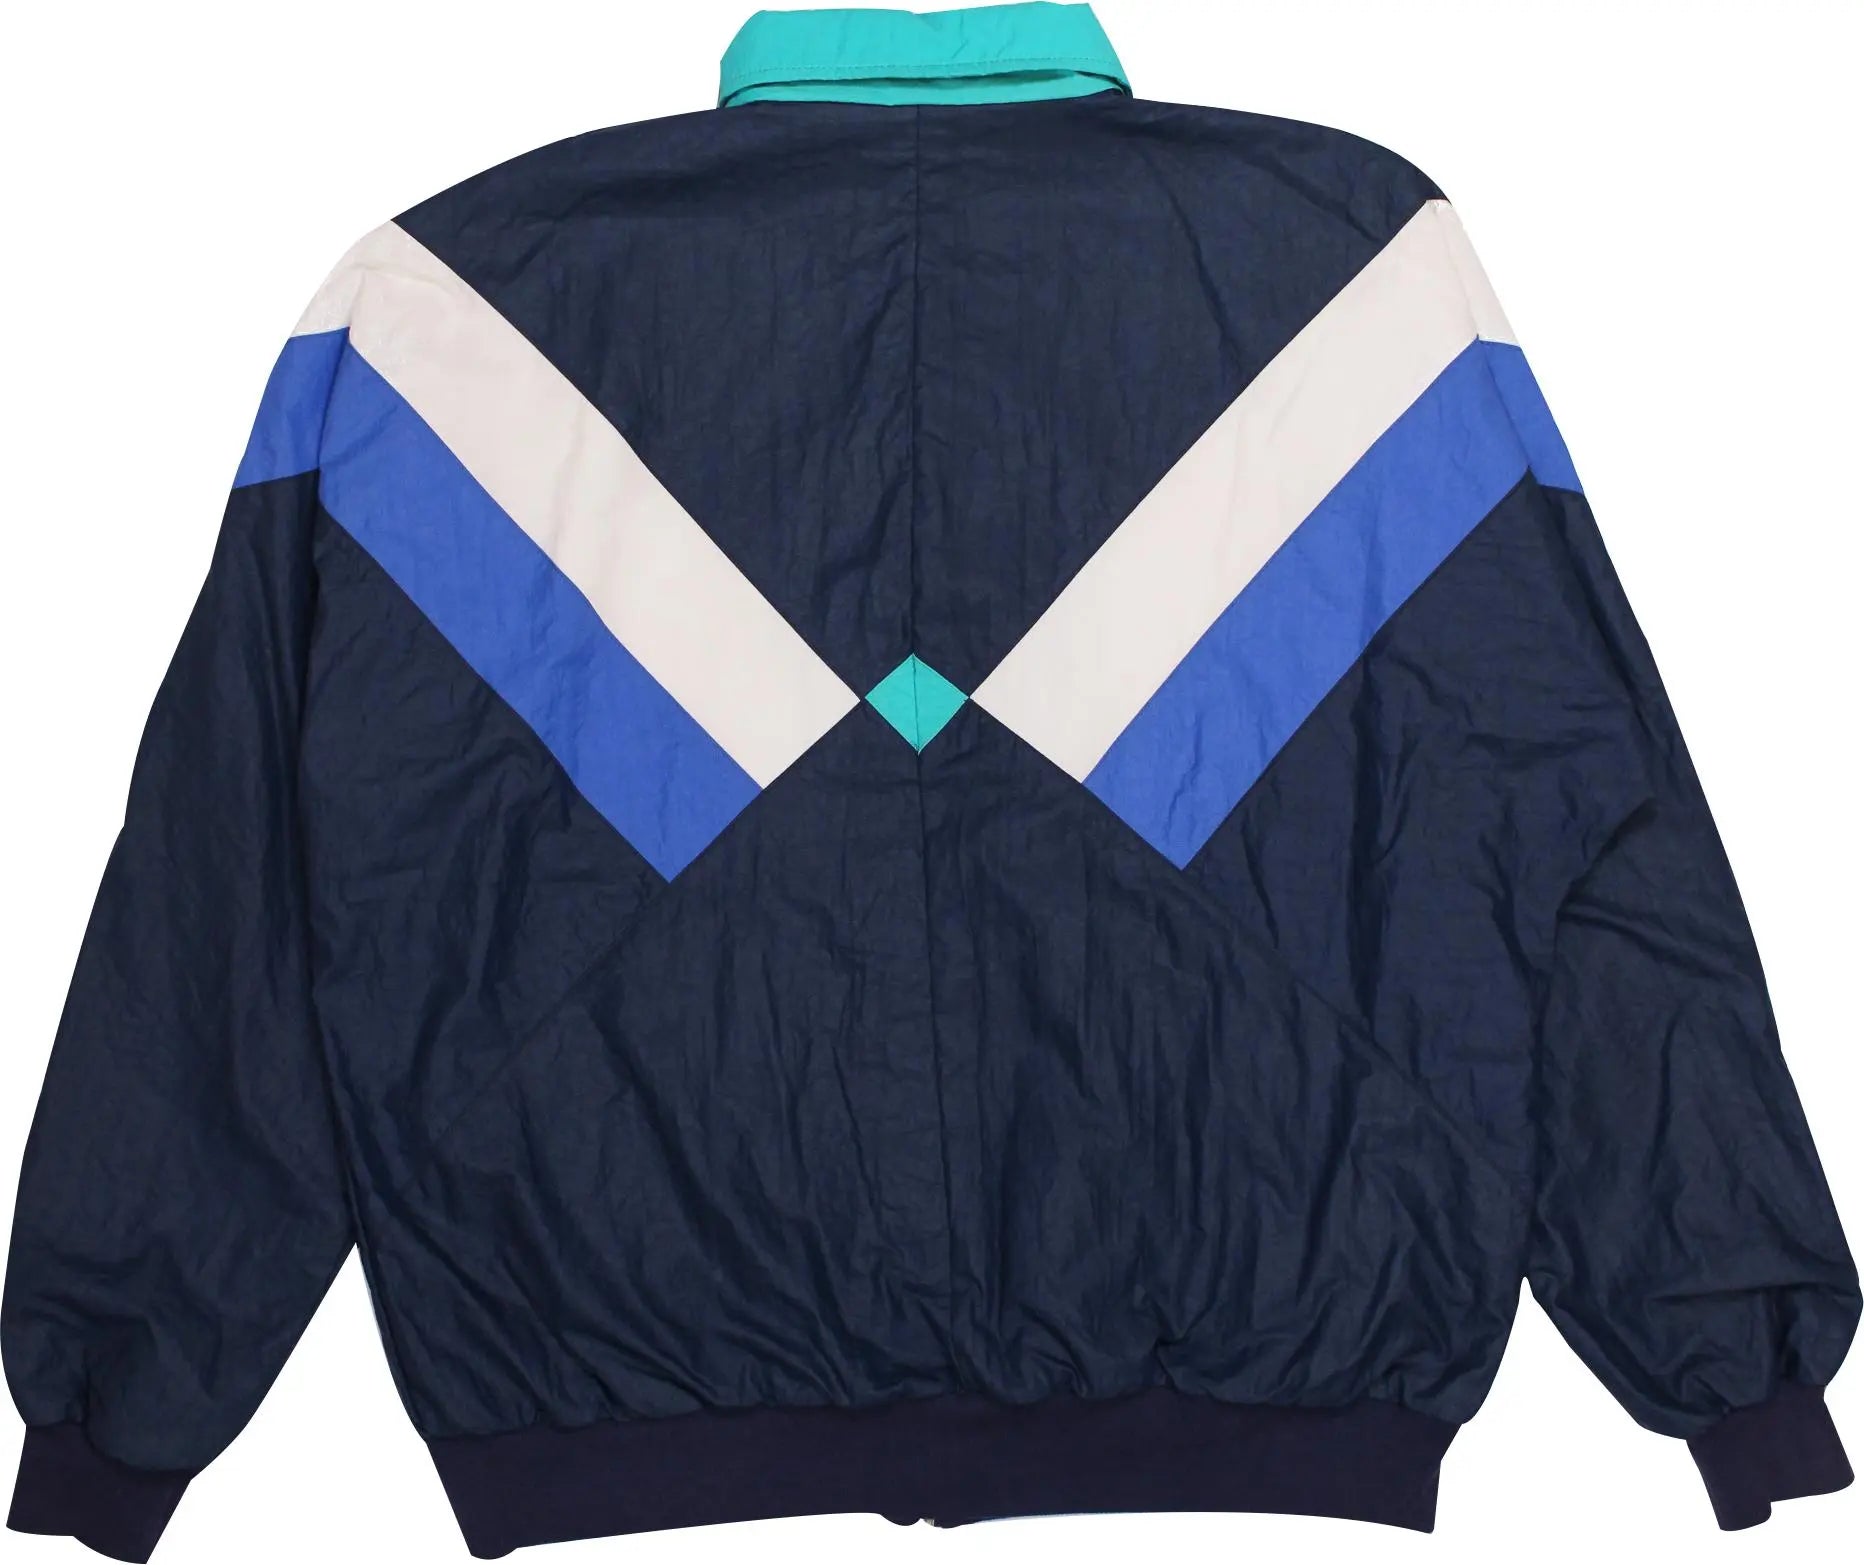 Bally - 90s Windbreaker- ThriftTale.com - Vintage and second handclothing